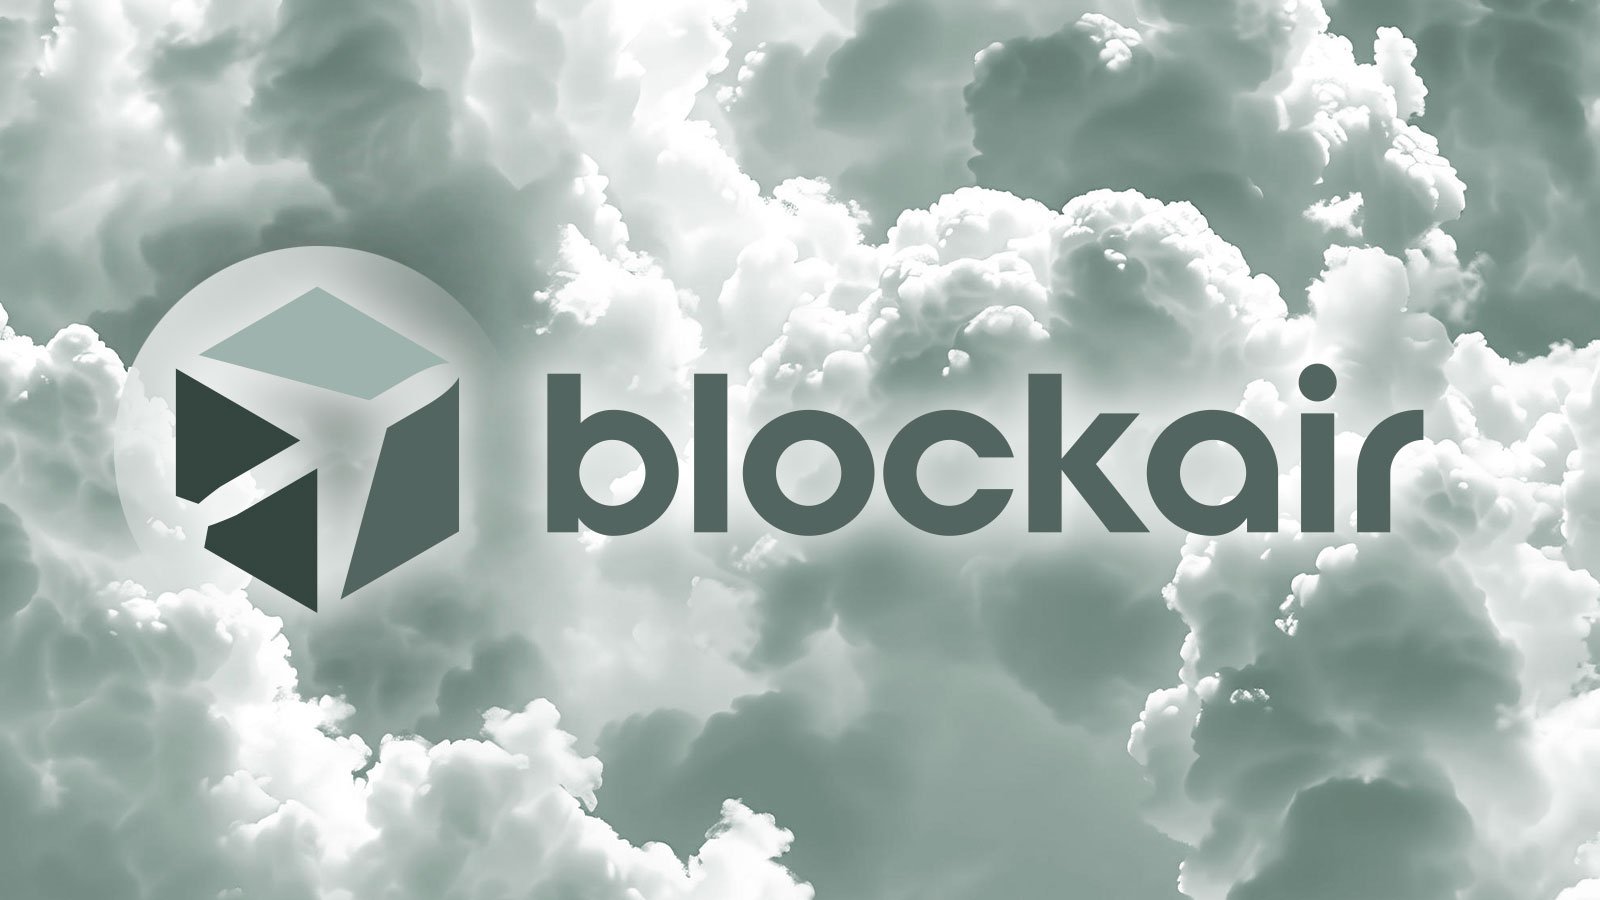 Blockair Is the Upcoming Blockchain Game to Watch – Here’s Why